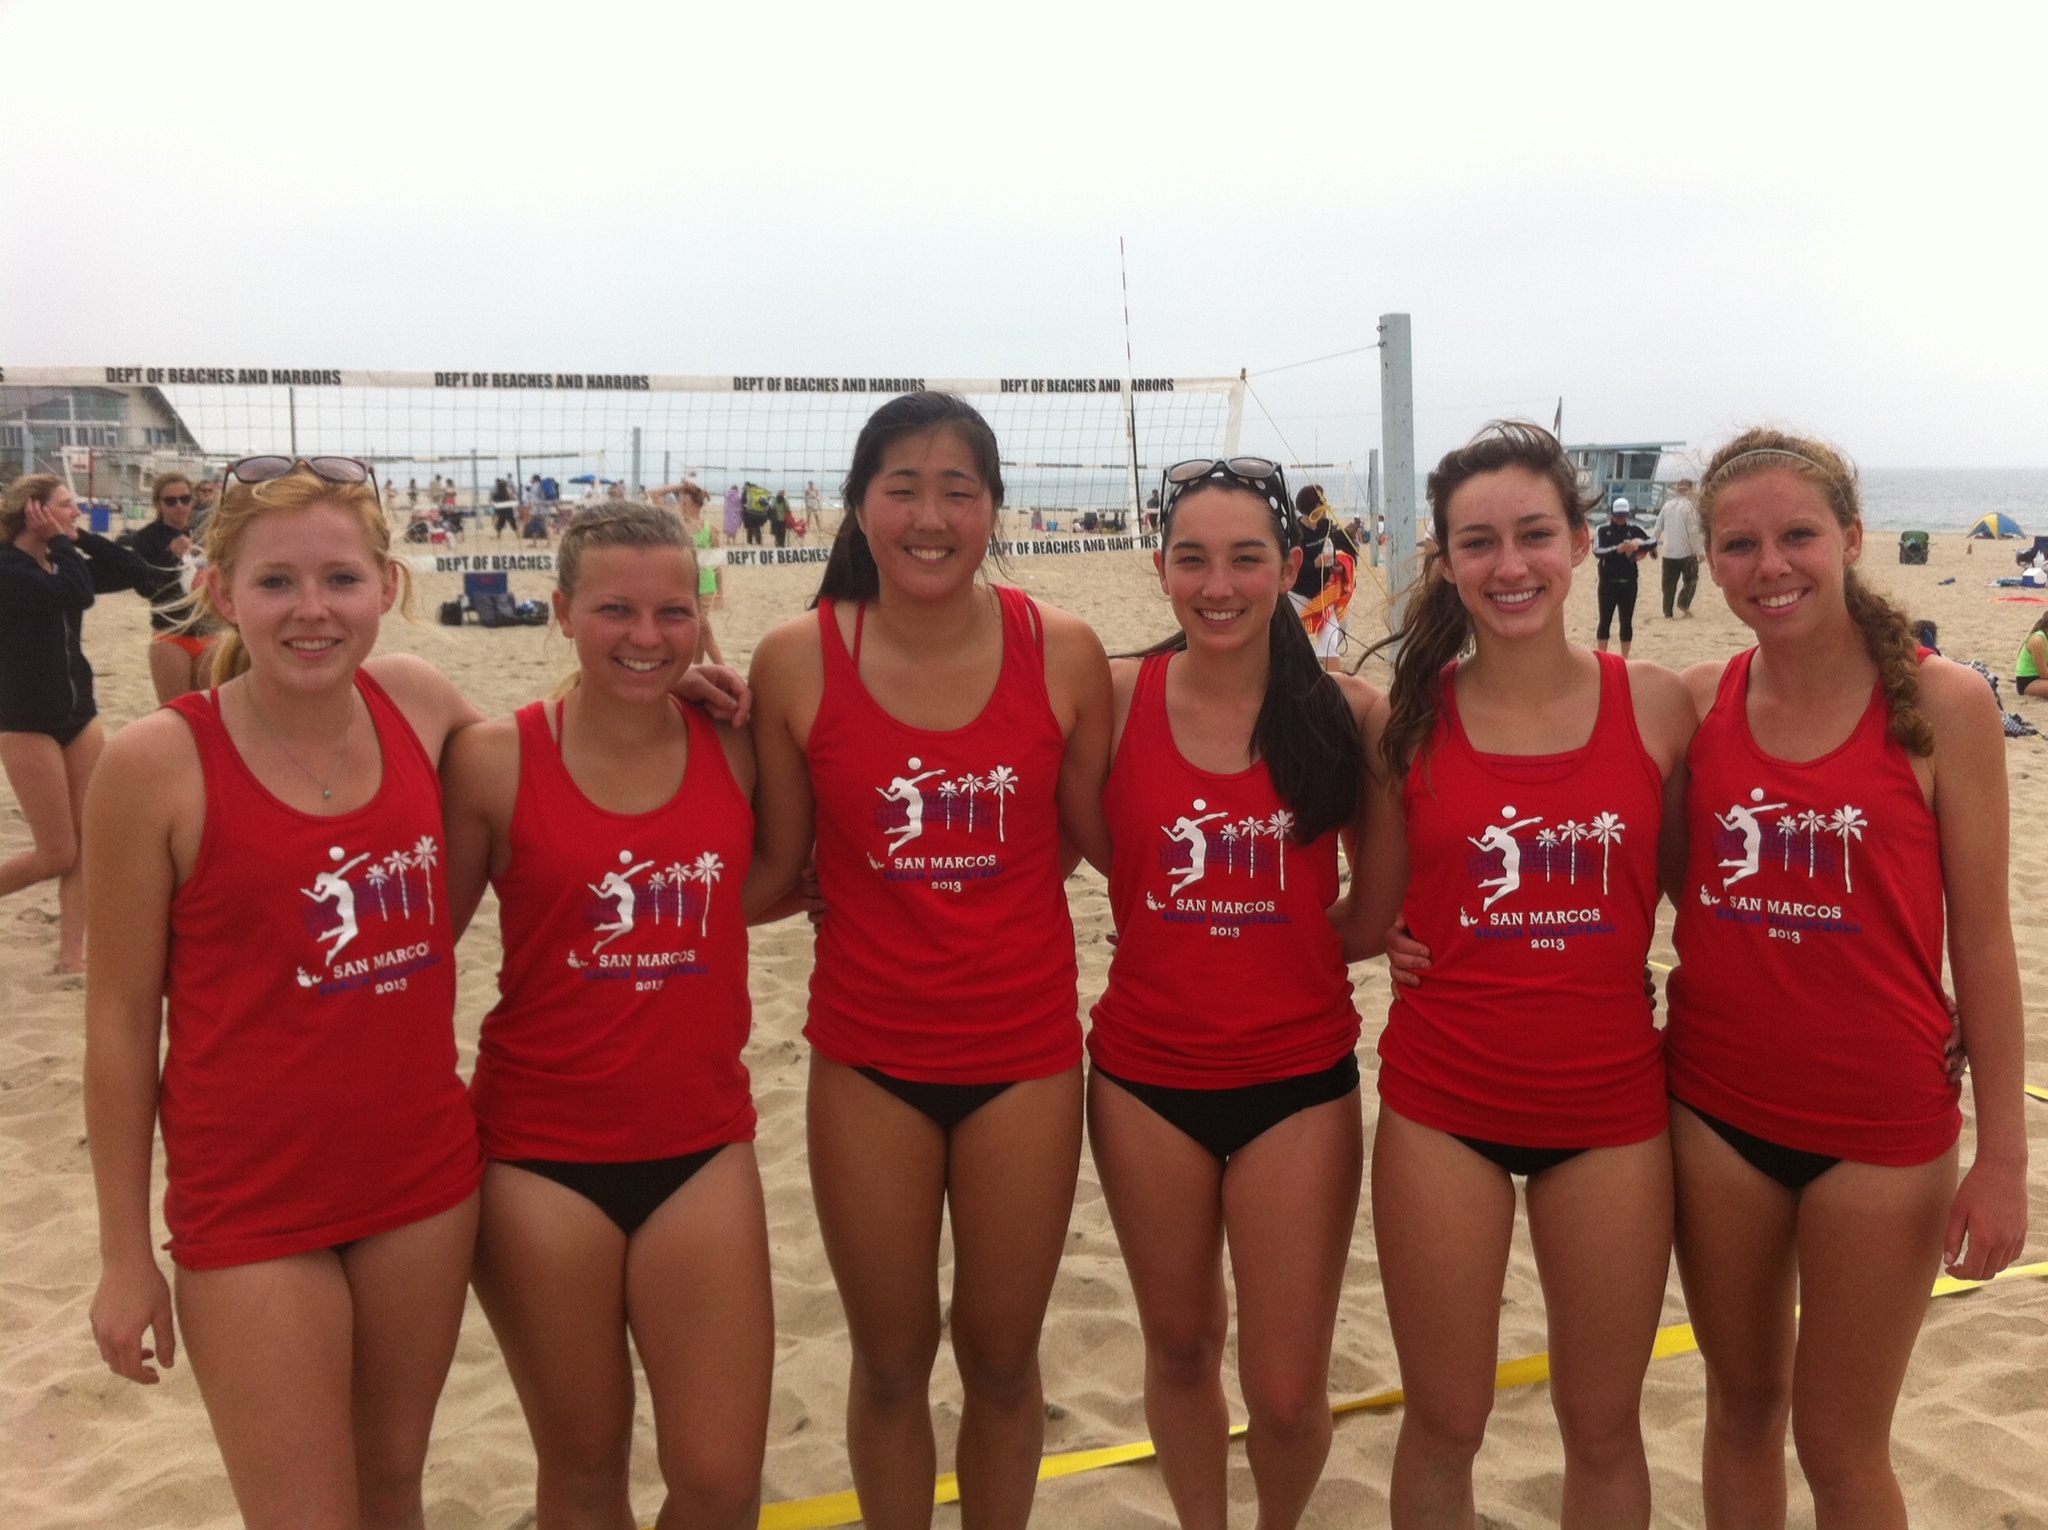 The San Marcos girls beach volleyball team went 2-0 at the first tournament at Playa del Rey. The teams that competed were, from left Clare Holehouse and Anika Wilson; Katie Kim and Andie O'Donnell; Jenny Swanson and Alex Seyle